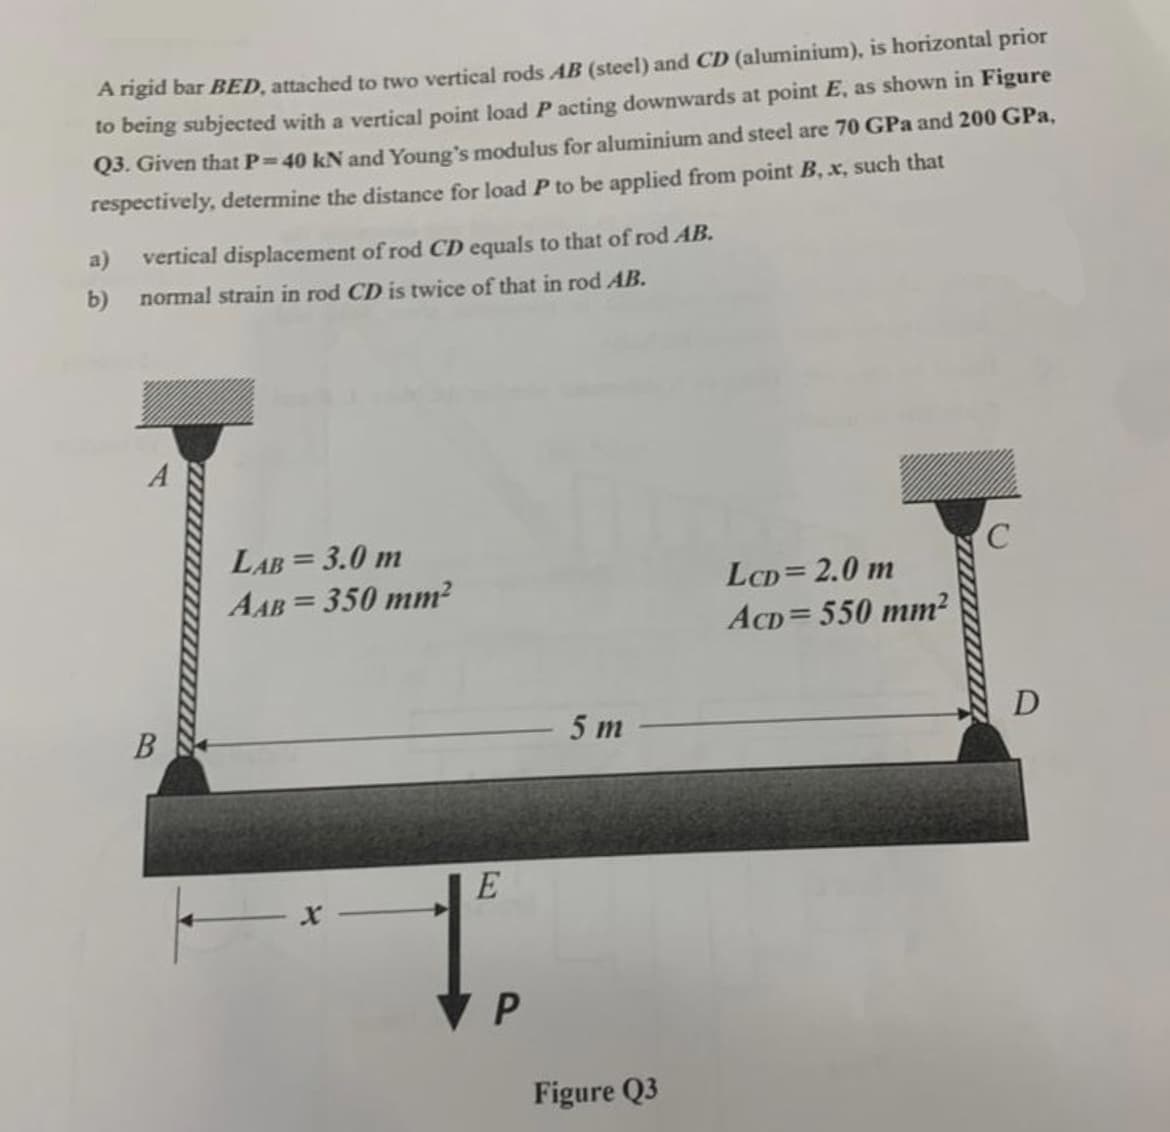 A rigid bar BED, attached to two vertical rods AB (steel) and CD (aluminium), is horizontal prior
to being subjected with a vertical point load P acting downwards at point E, as shown in Figure
Q3. Given that P=40 kN and Young's modulus for aluminium and steel are 70 GPa and 200 GPa,
respectively, determine the distance for load P to be applied from point B, x, such that
a)
b)
vertical displacement of rod CD equals to that of rod AB.
normal strain in rod CD is twice of that in rod AB.
B
A
LAB = 3.0 m
AAB
350 mm²
X
E
5 m
P
Figure Q3
C
LCD = 2.0 m
ACD=550 mm²
D